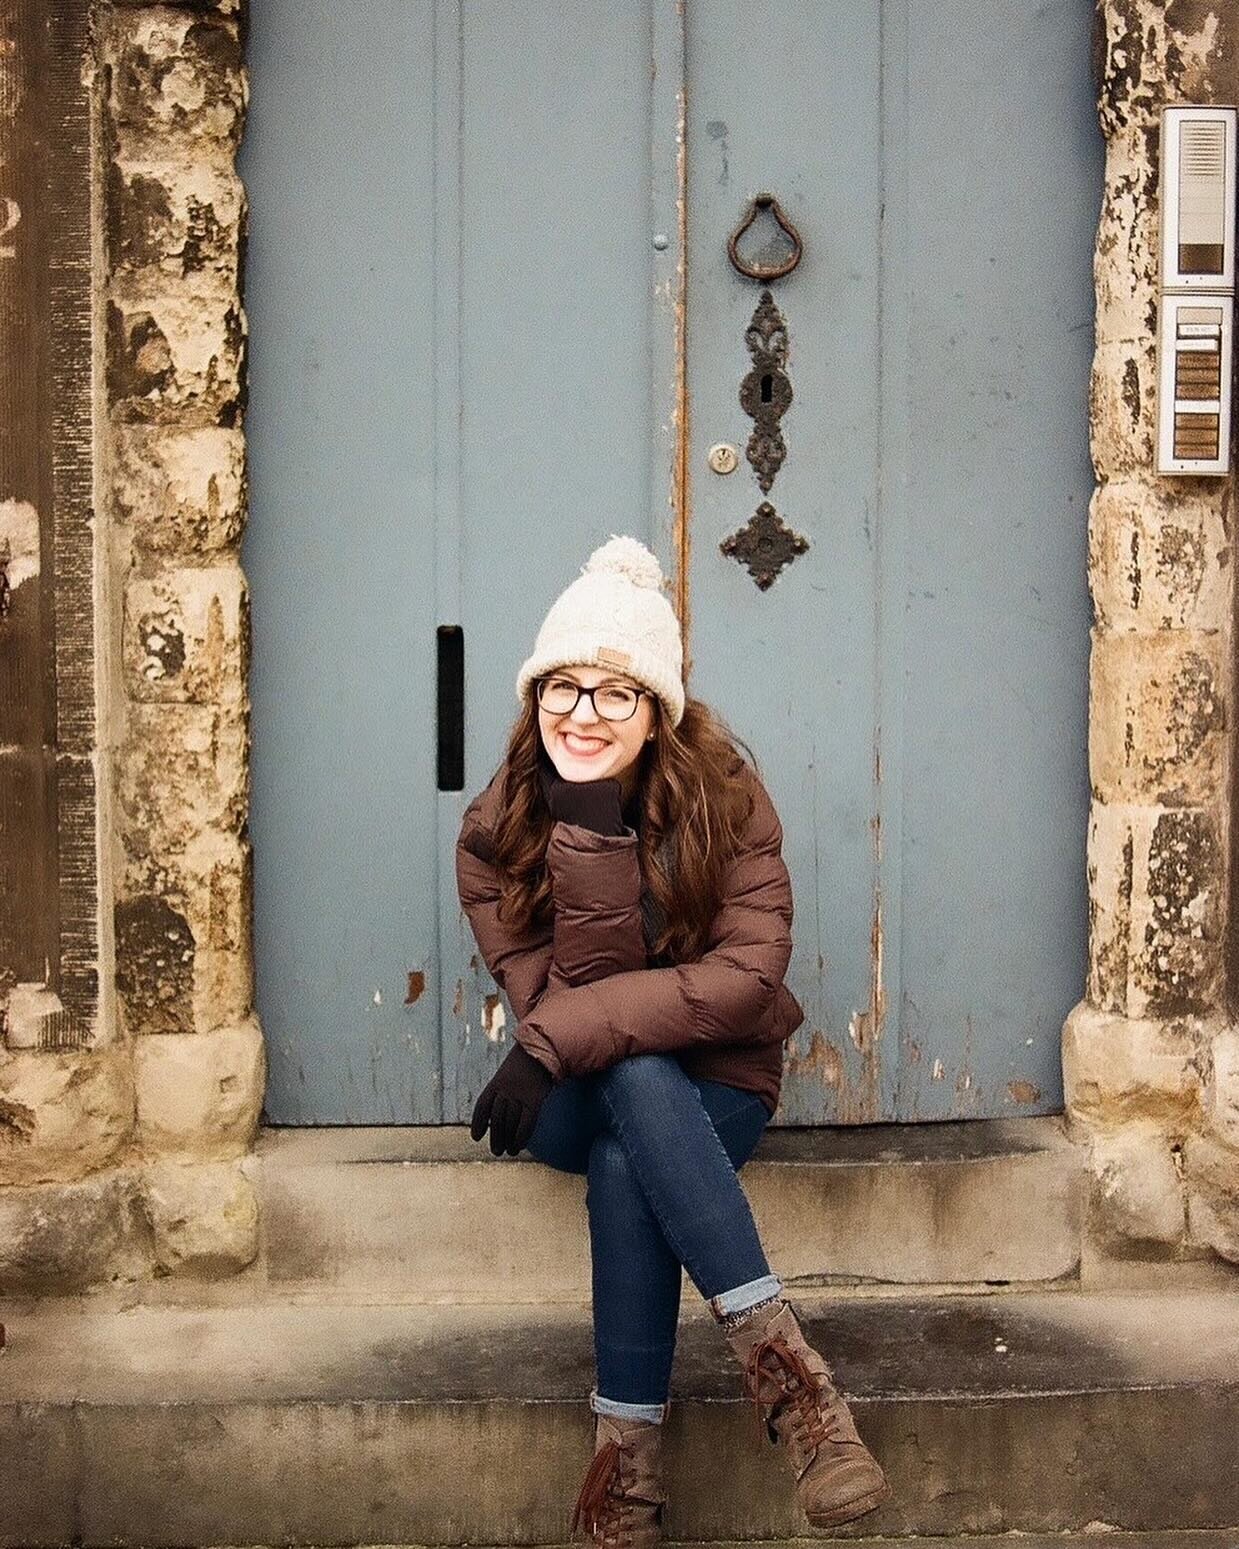 Me last year living my best life in Ghent not minding the cold one bit.

Not pictured: me this year in Georgia being an absolute baby about the cold.